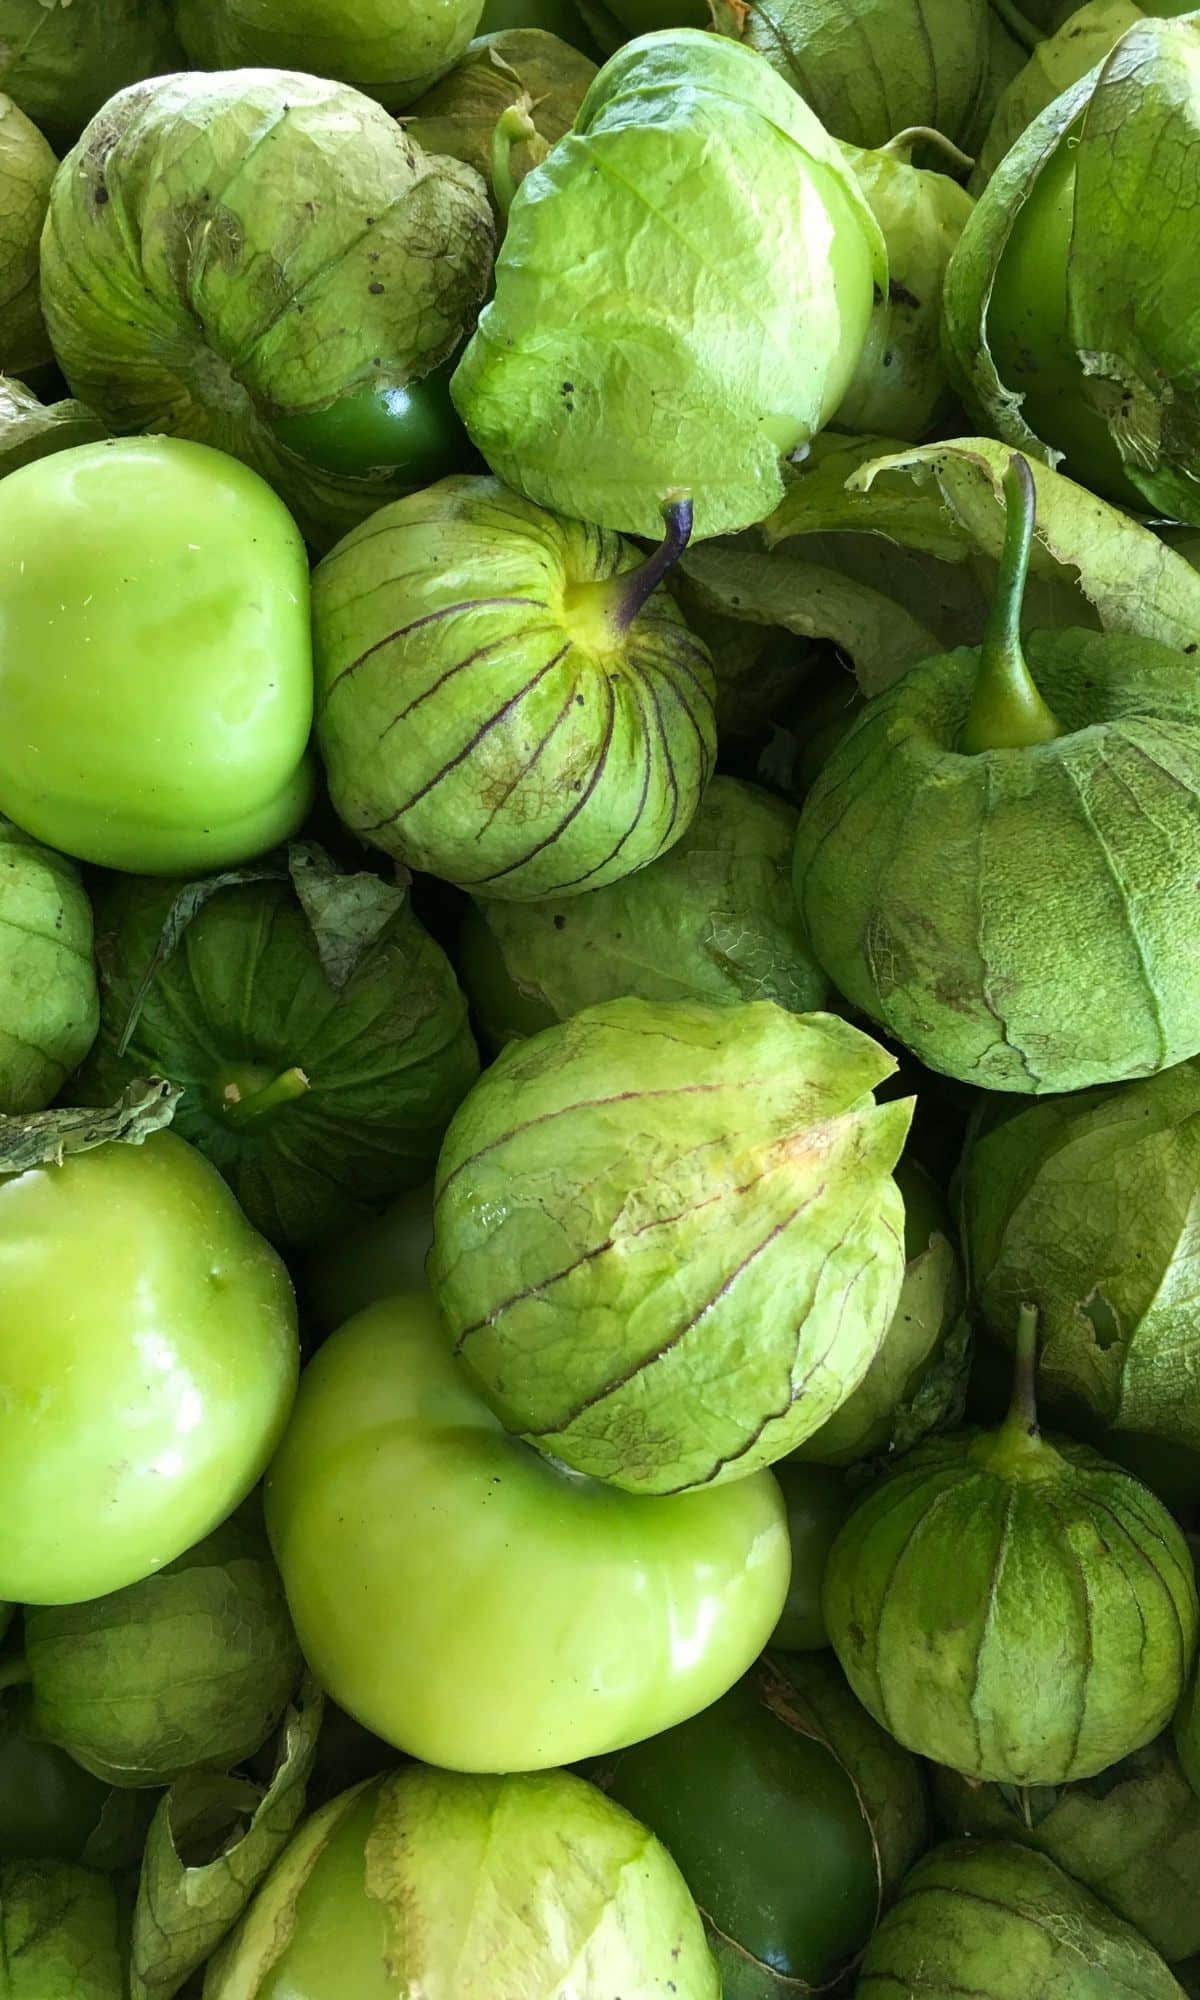 Lots of green tomatillos bunched together.